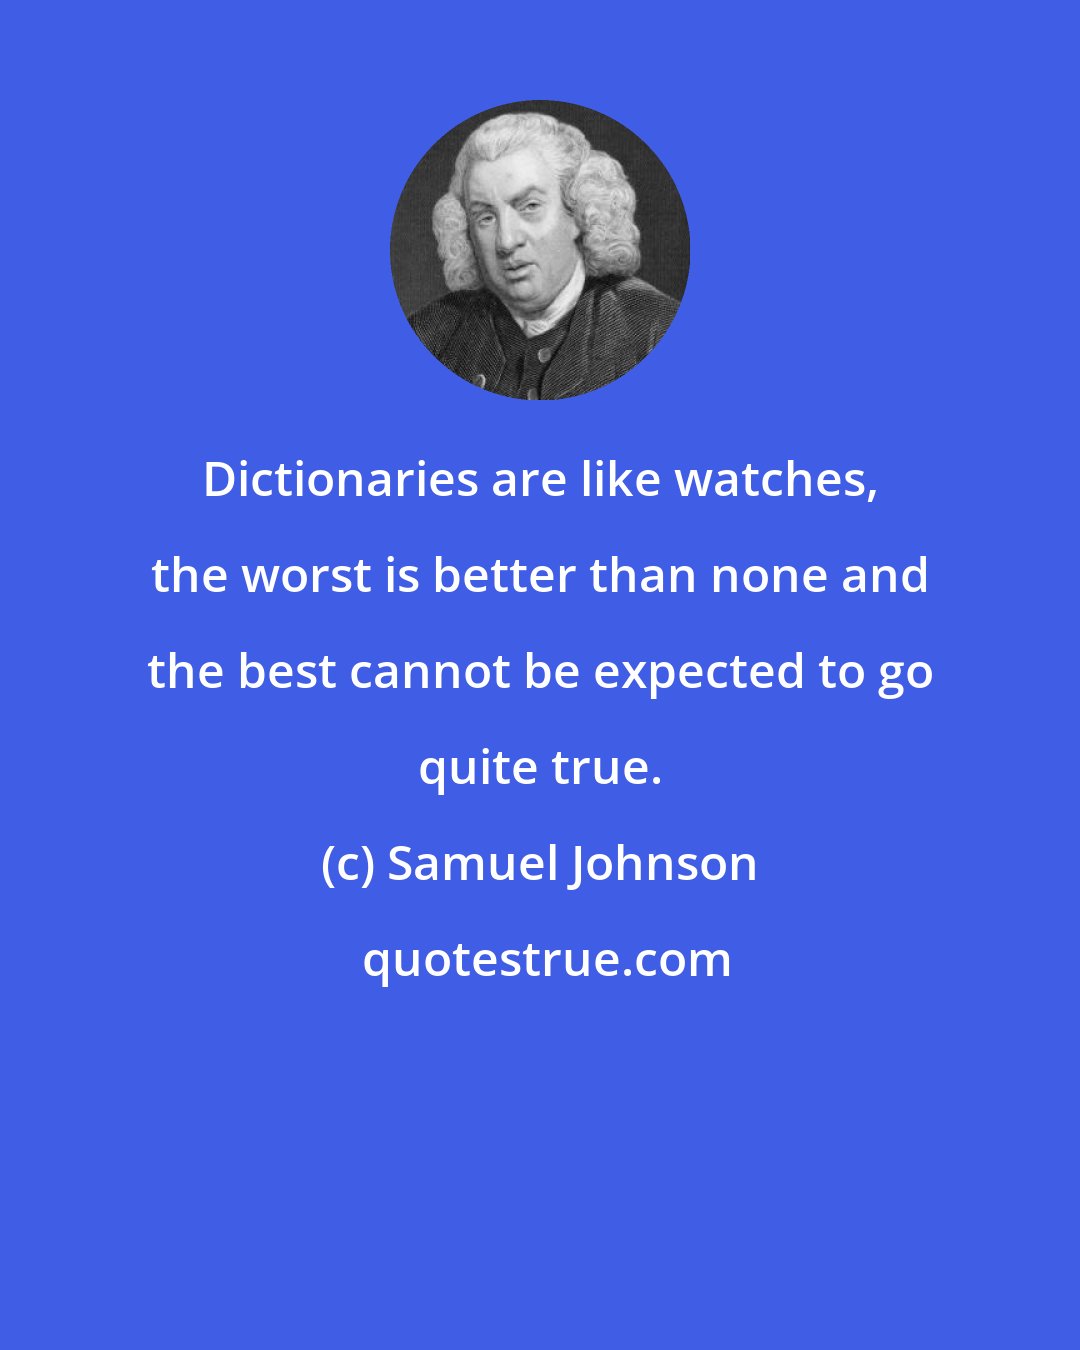 Samuel Johnson: Dictionaries are like watches, the worst is better than none and the best cannot be expected to go quite true.